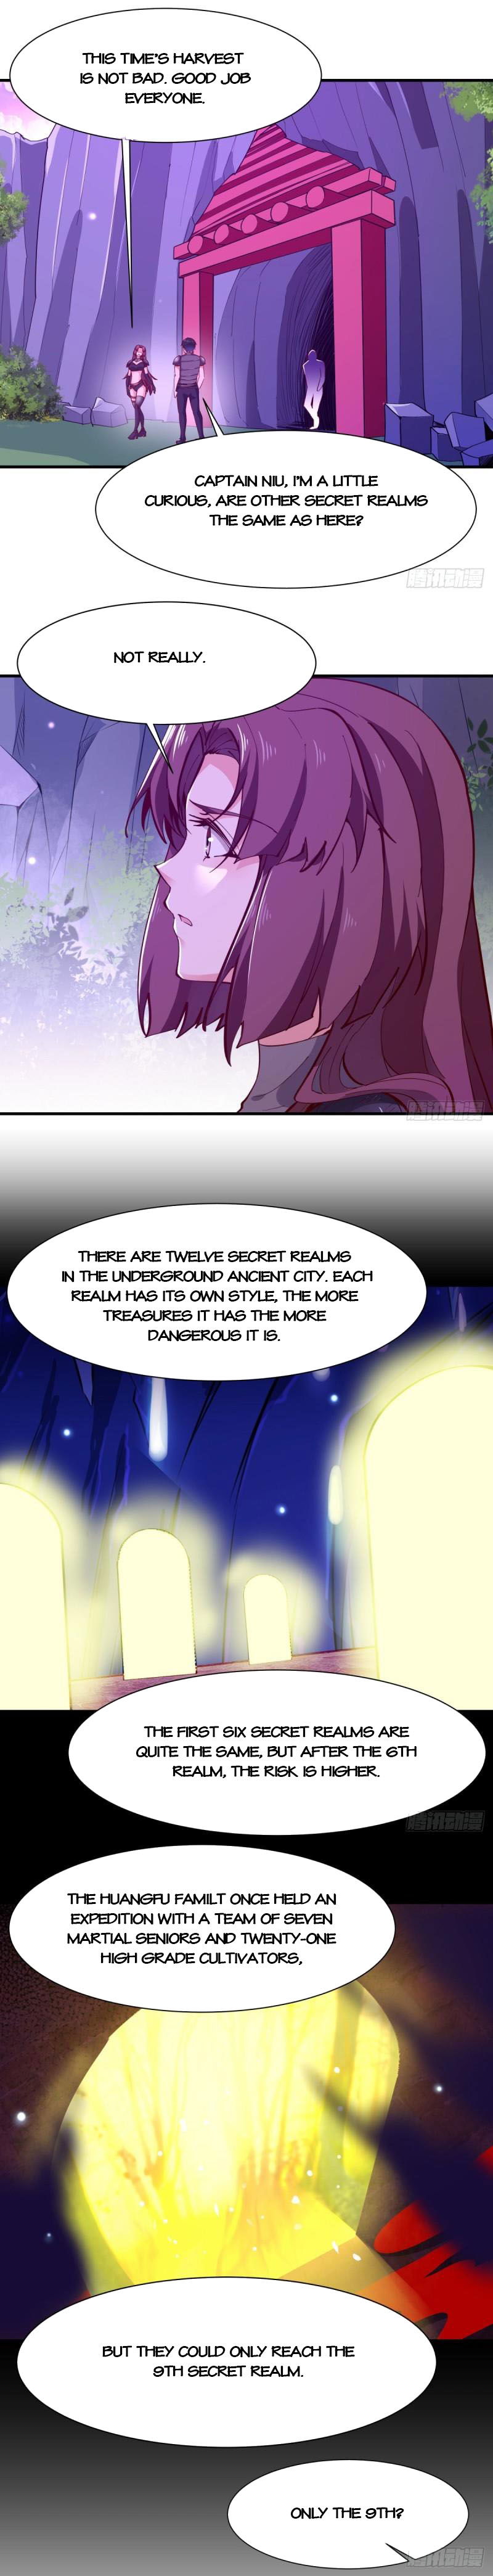 Rebirth: City Deity Chapter 153 page 6